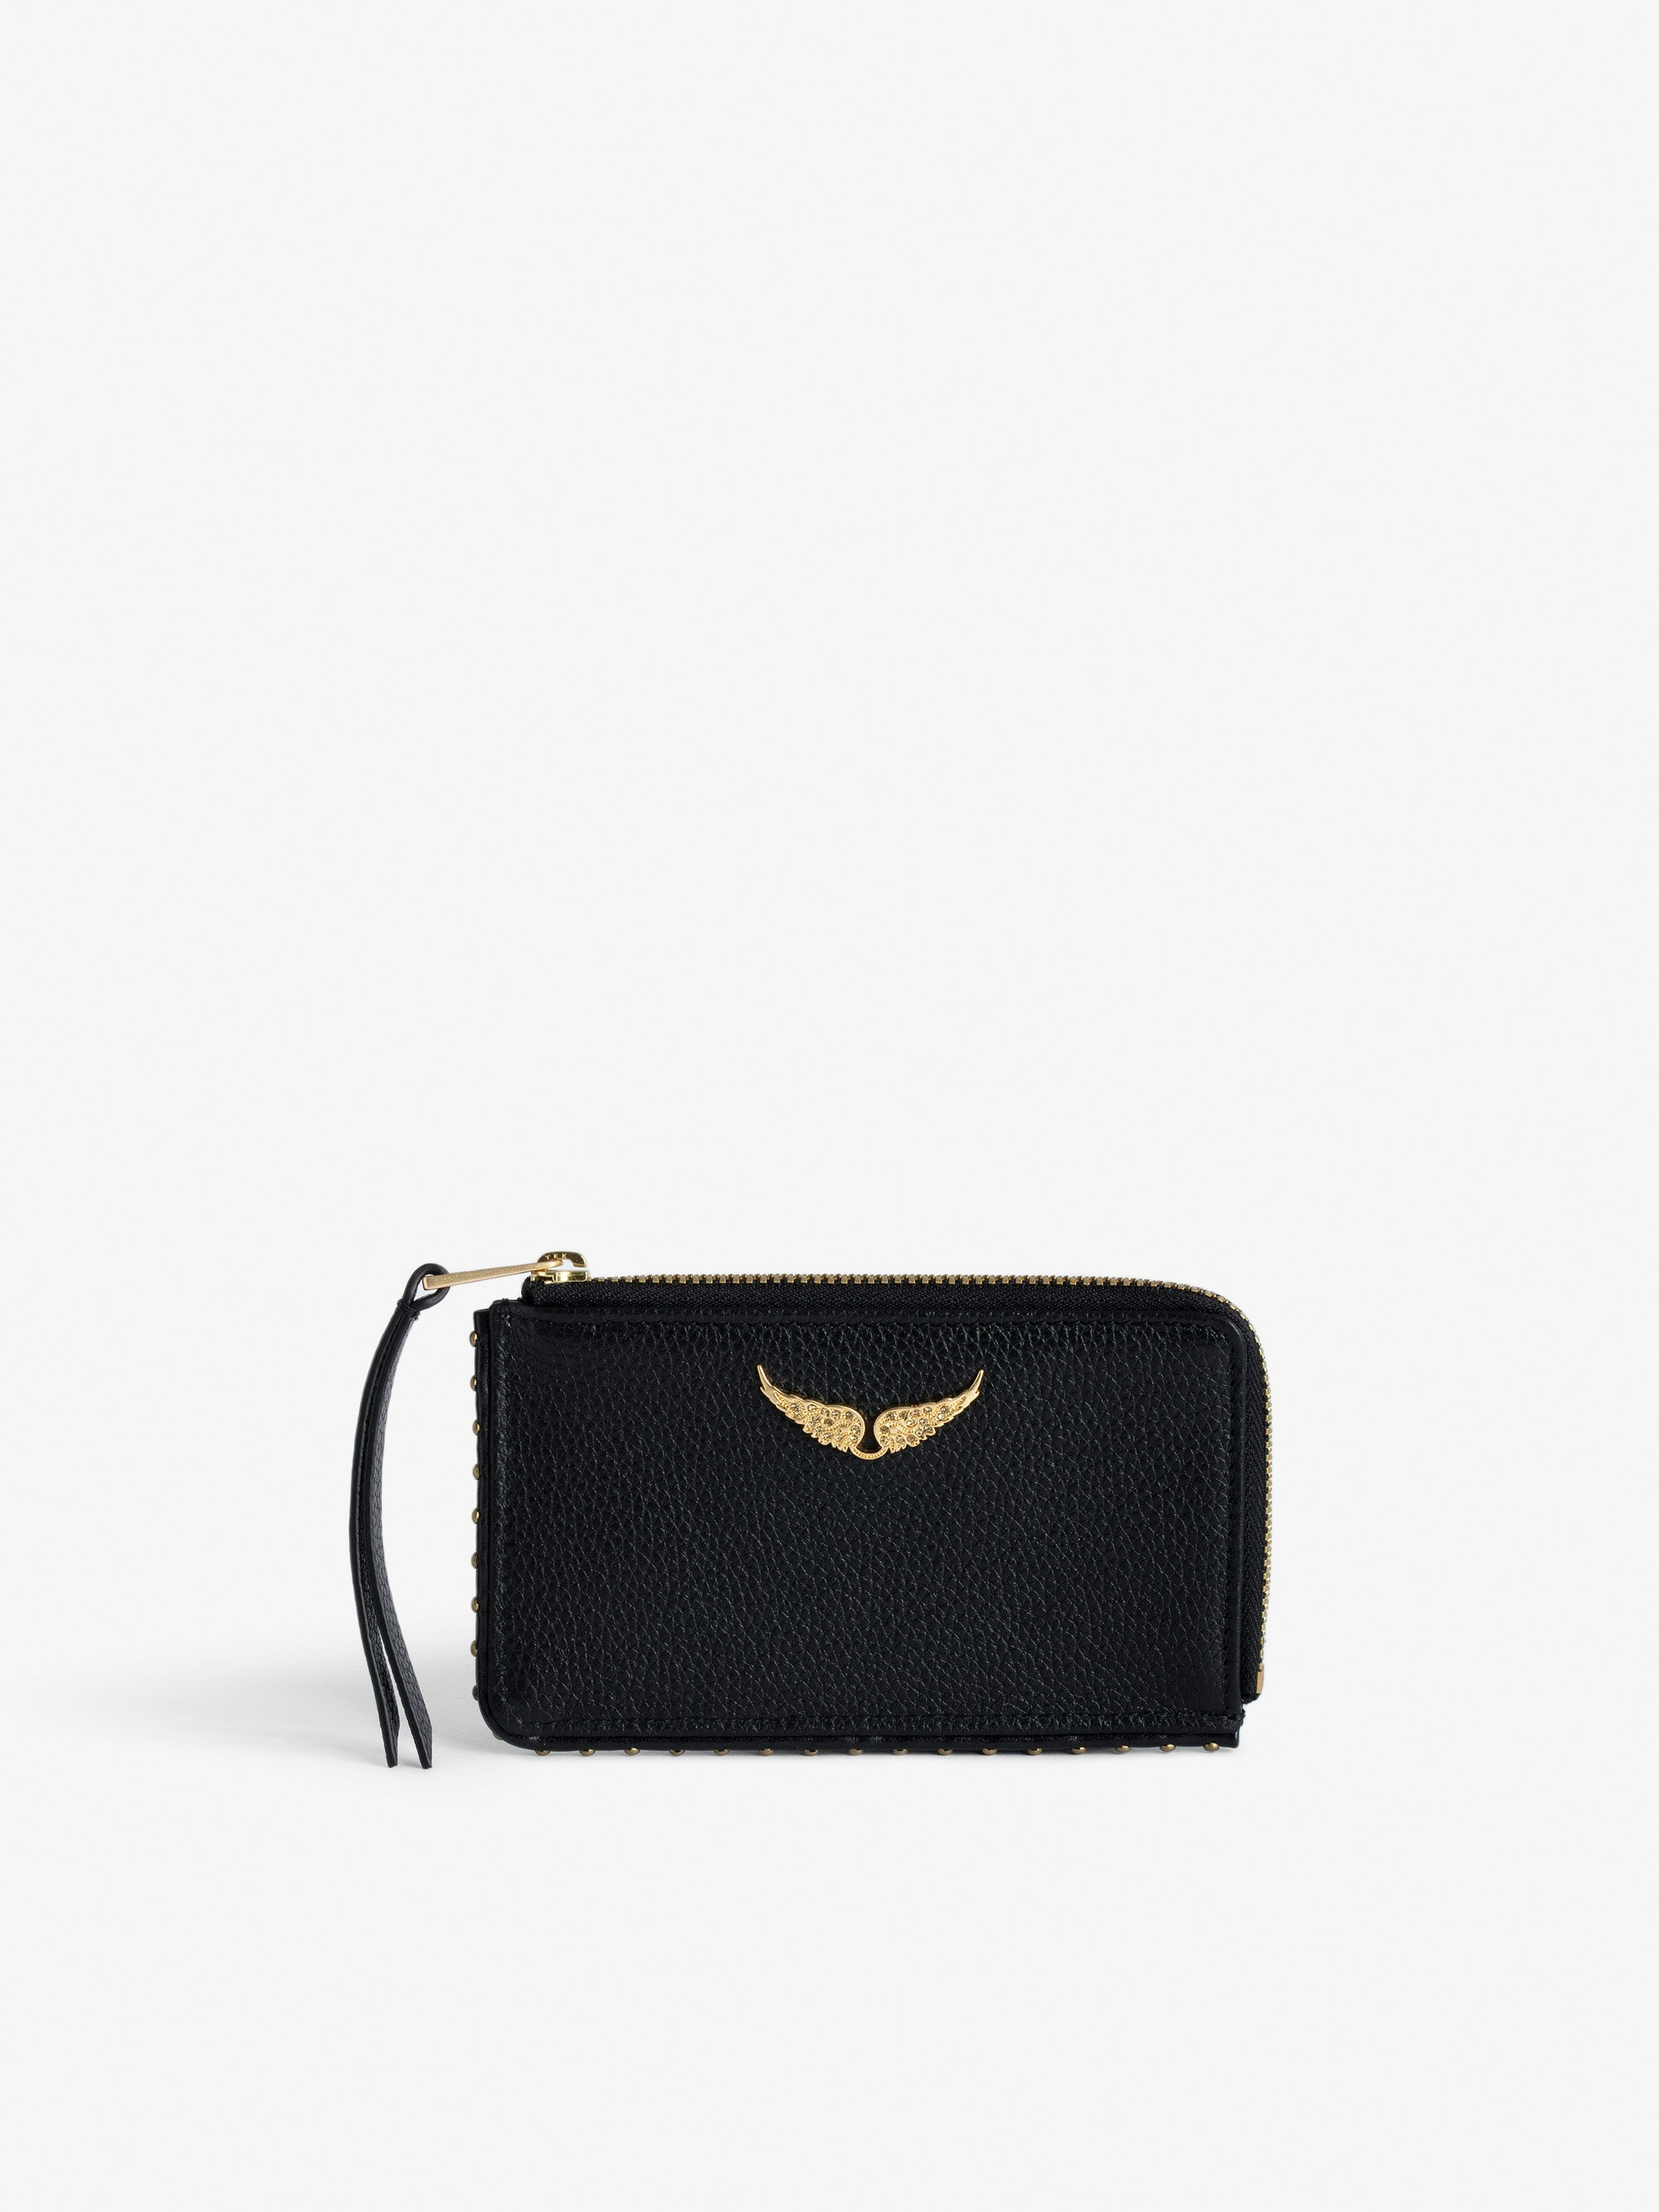 ZV Card Card Holder - Women’s black grained leather card holder with studded trim and wings charm.